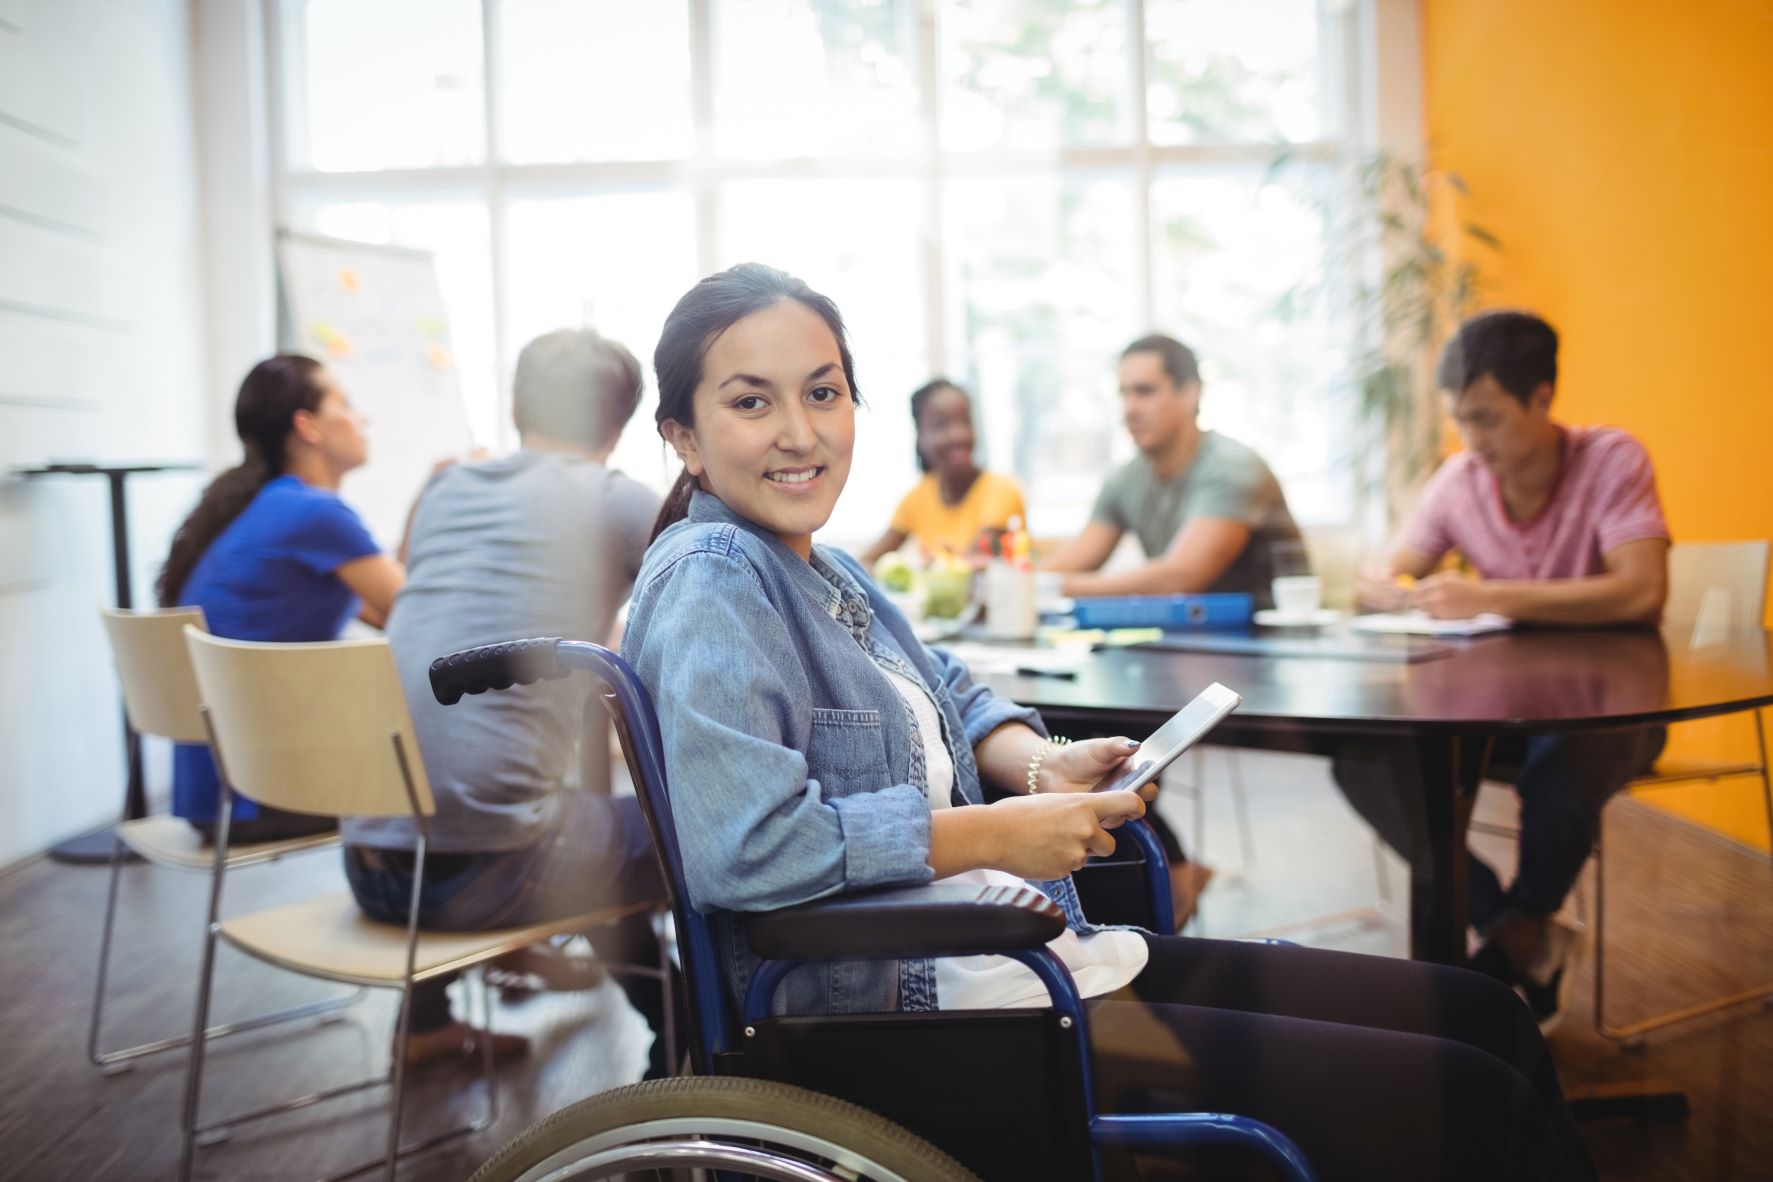 A young disabled woman in a wheelchair looks to the camera while others behind her sit at a table.